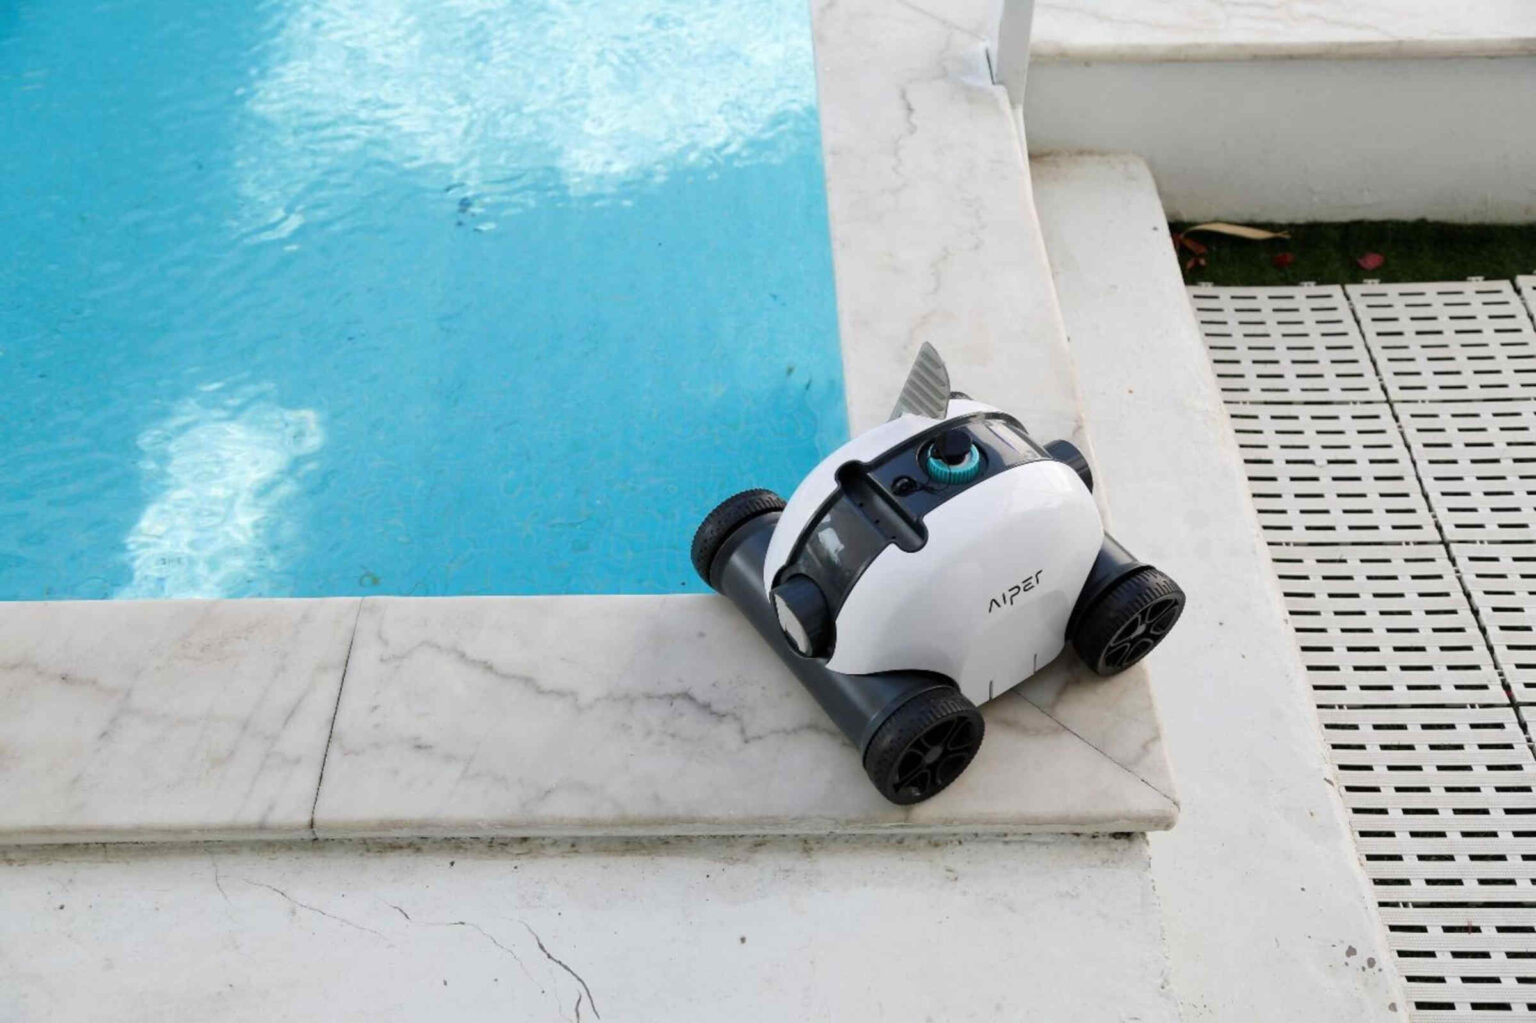 Use the newest Seagull 1000 Cordless Robotic Pool Cleaner so you don't have to lift a finger ever again before going for a swim on a hot day!